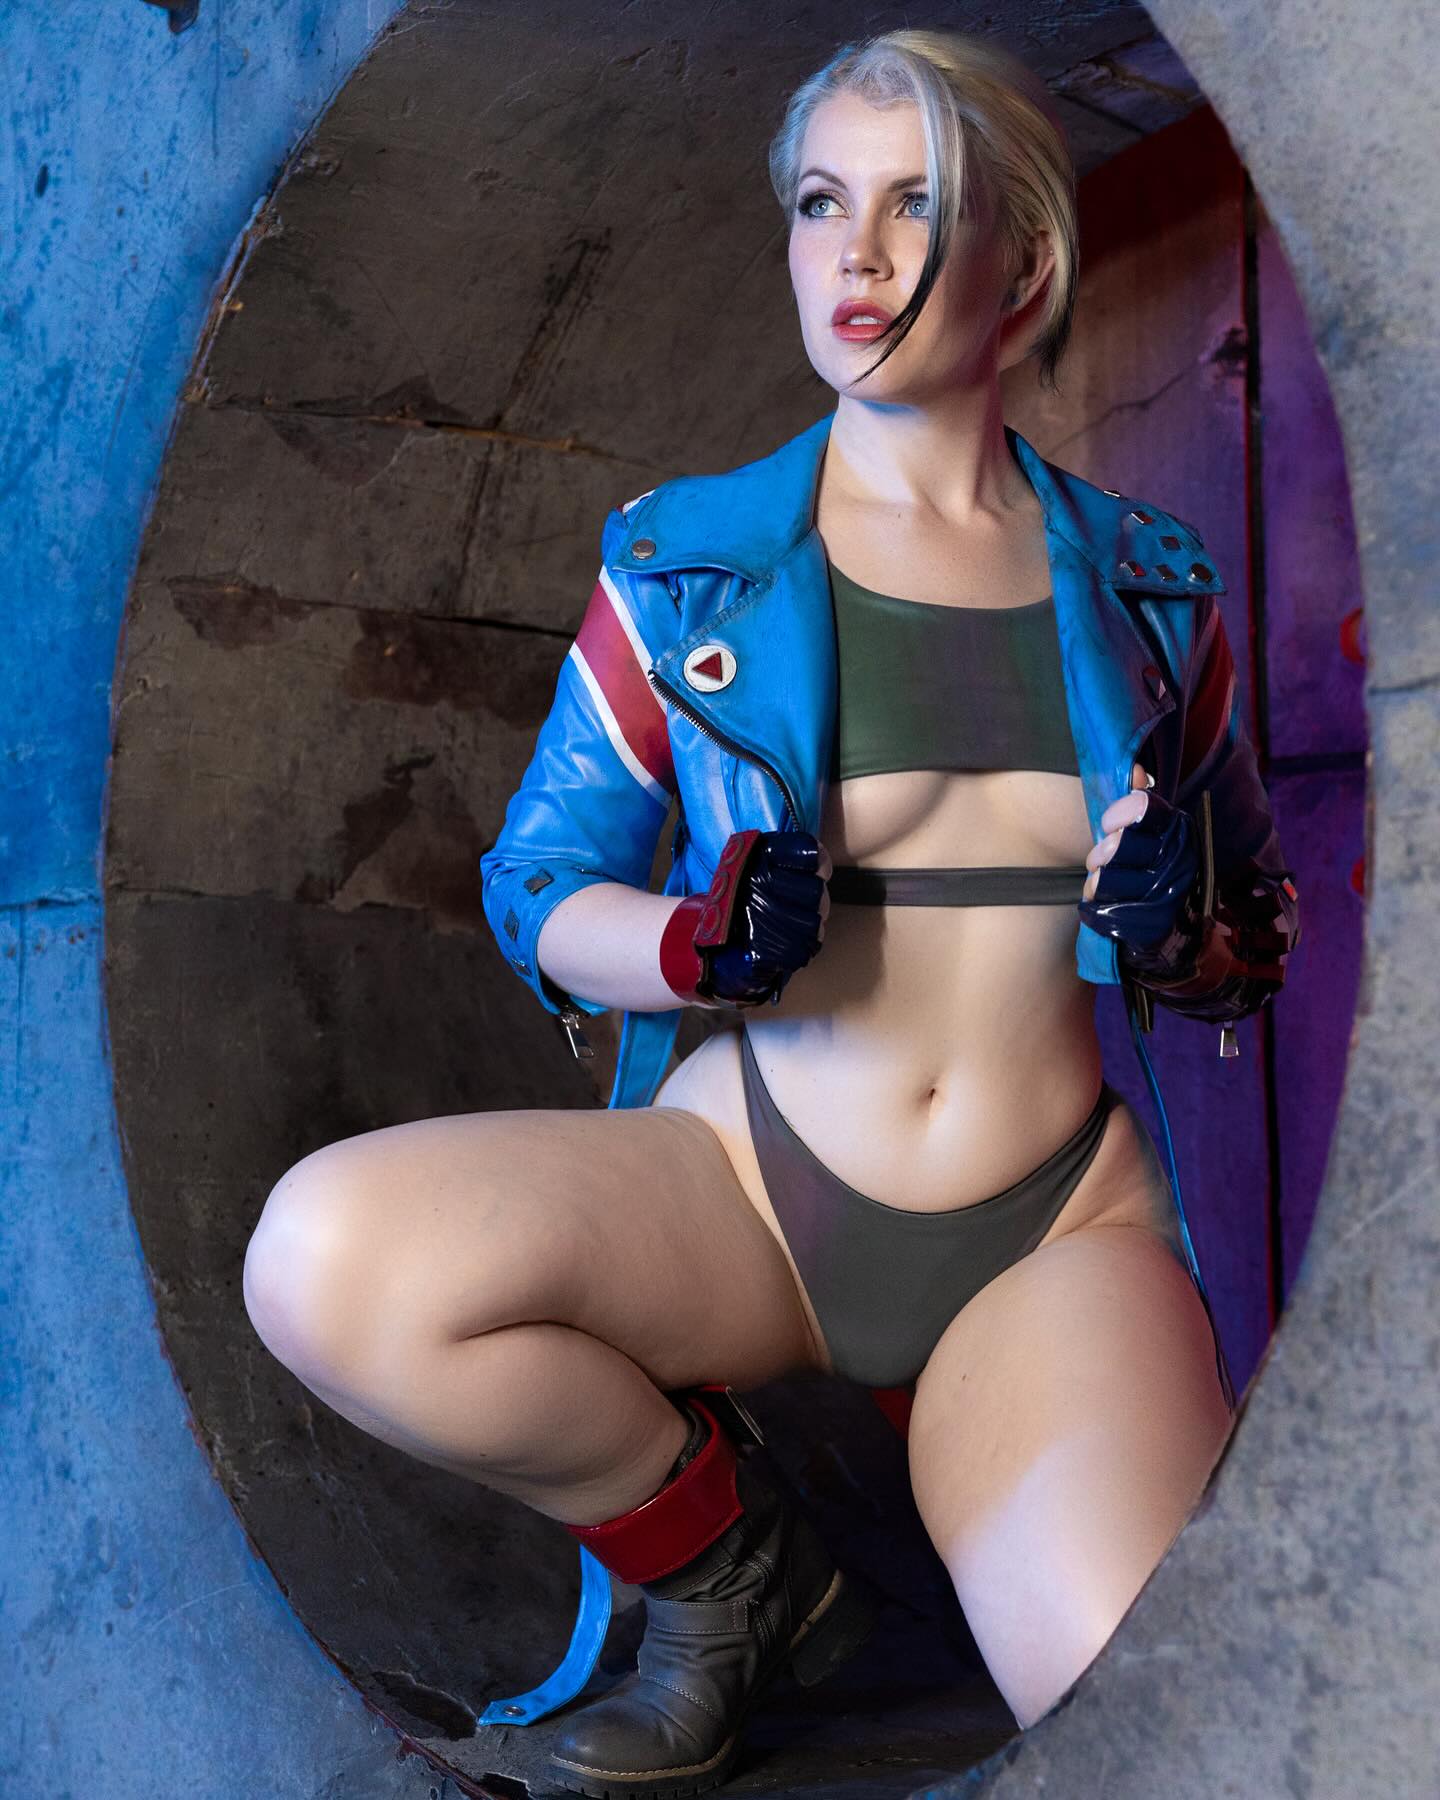 Finding cool places to crouch. Today’s the last day my Cammy and Vaggie sets will be available. Check out the link in my bio for more fun stuff! #cammy #cammystreetfighter #cammystreetfightercosplayer #streetfighter #leatherjacket #blue